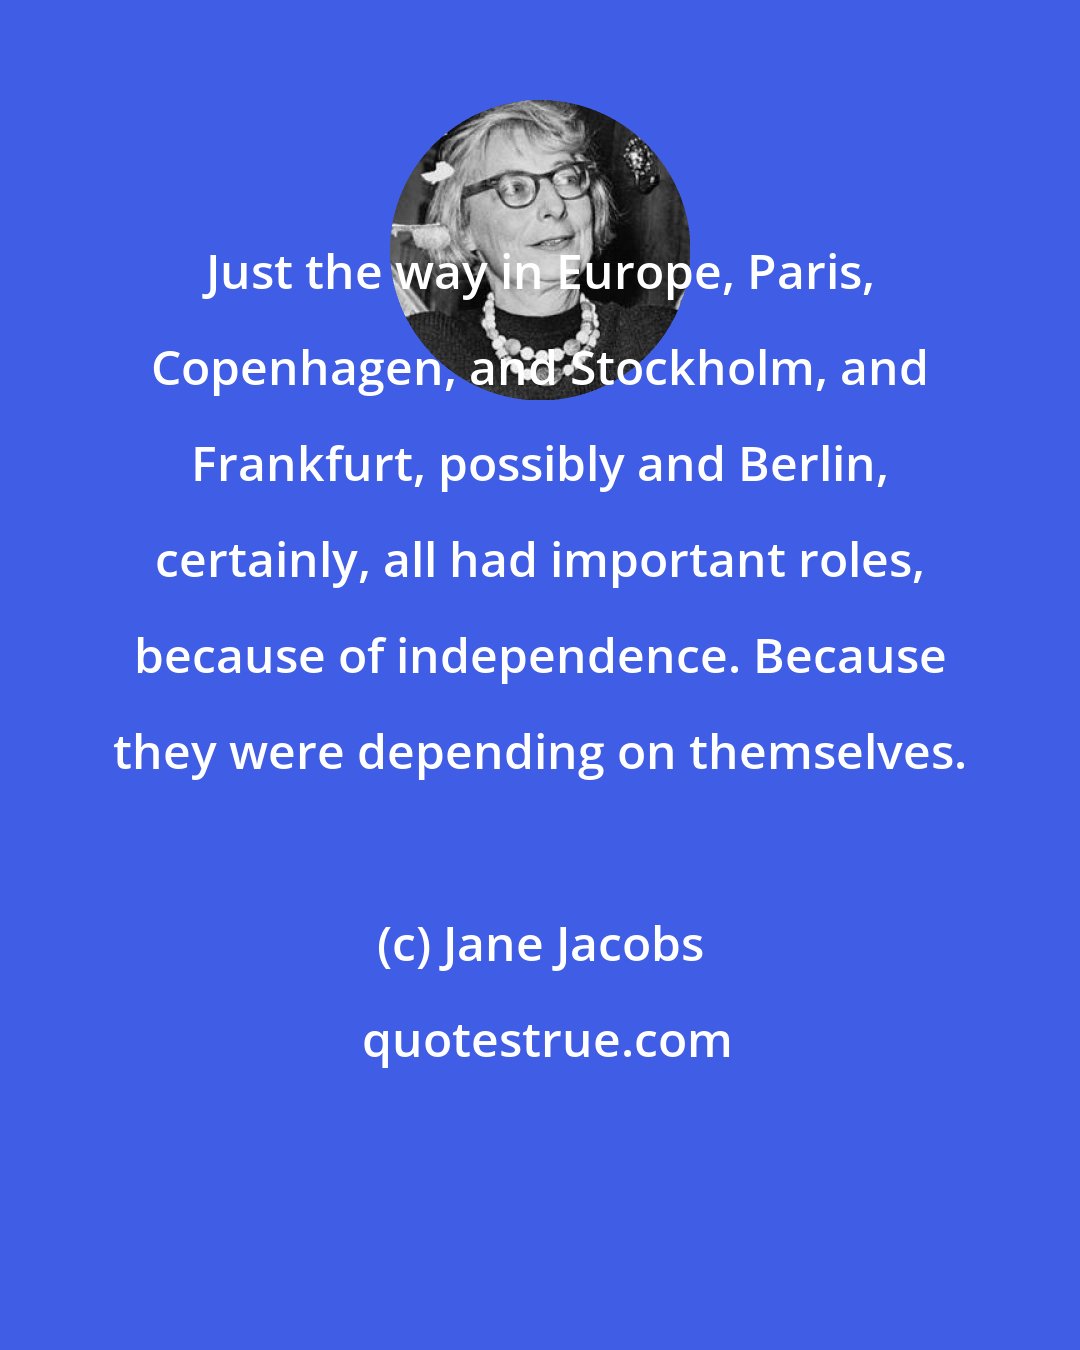 Jane Jacobs: Just the way in Europe, Paris, Copenhagen, and Stockholm, and Frankfurt, possibly and Berlin, certainly, all had important roles, because of independence. Because they were depending on themselves.